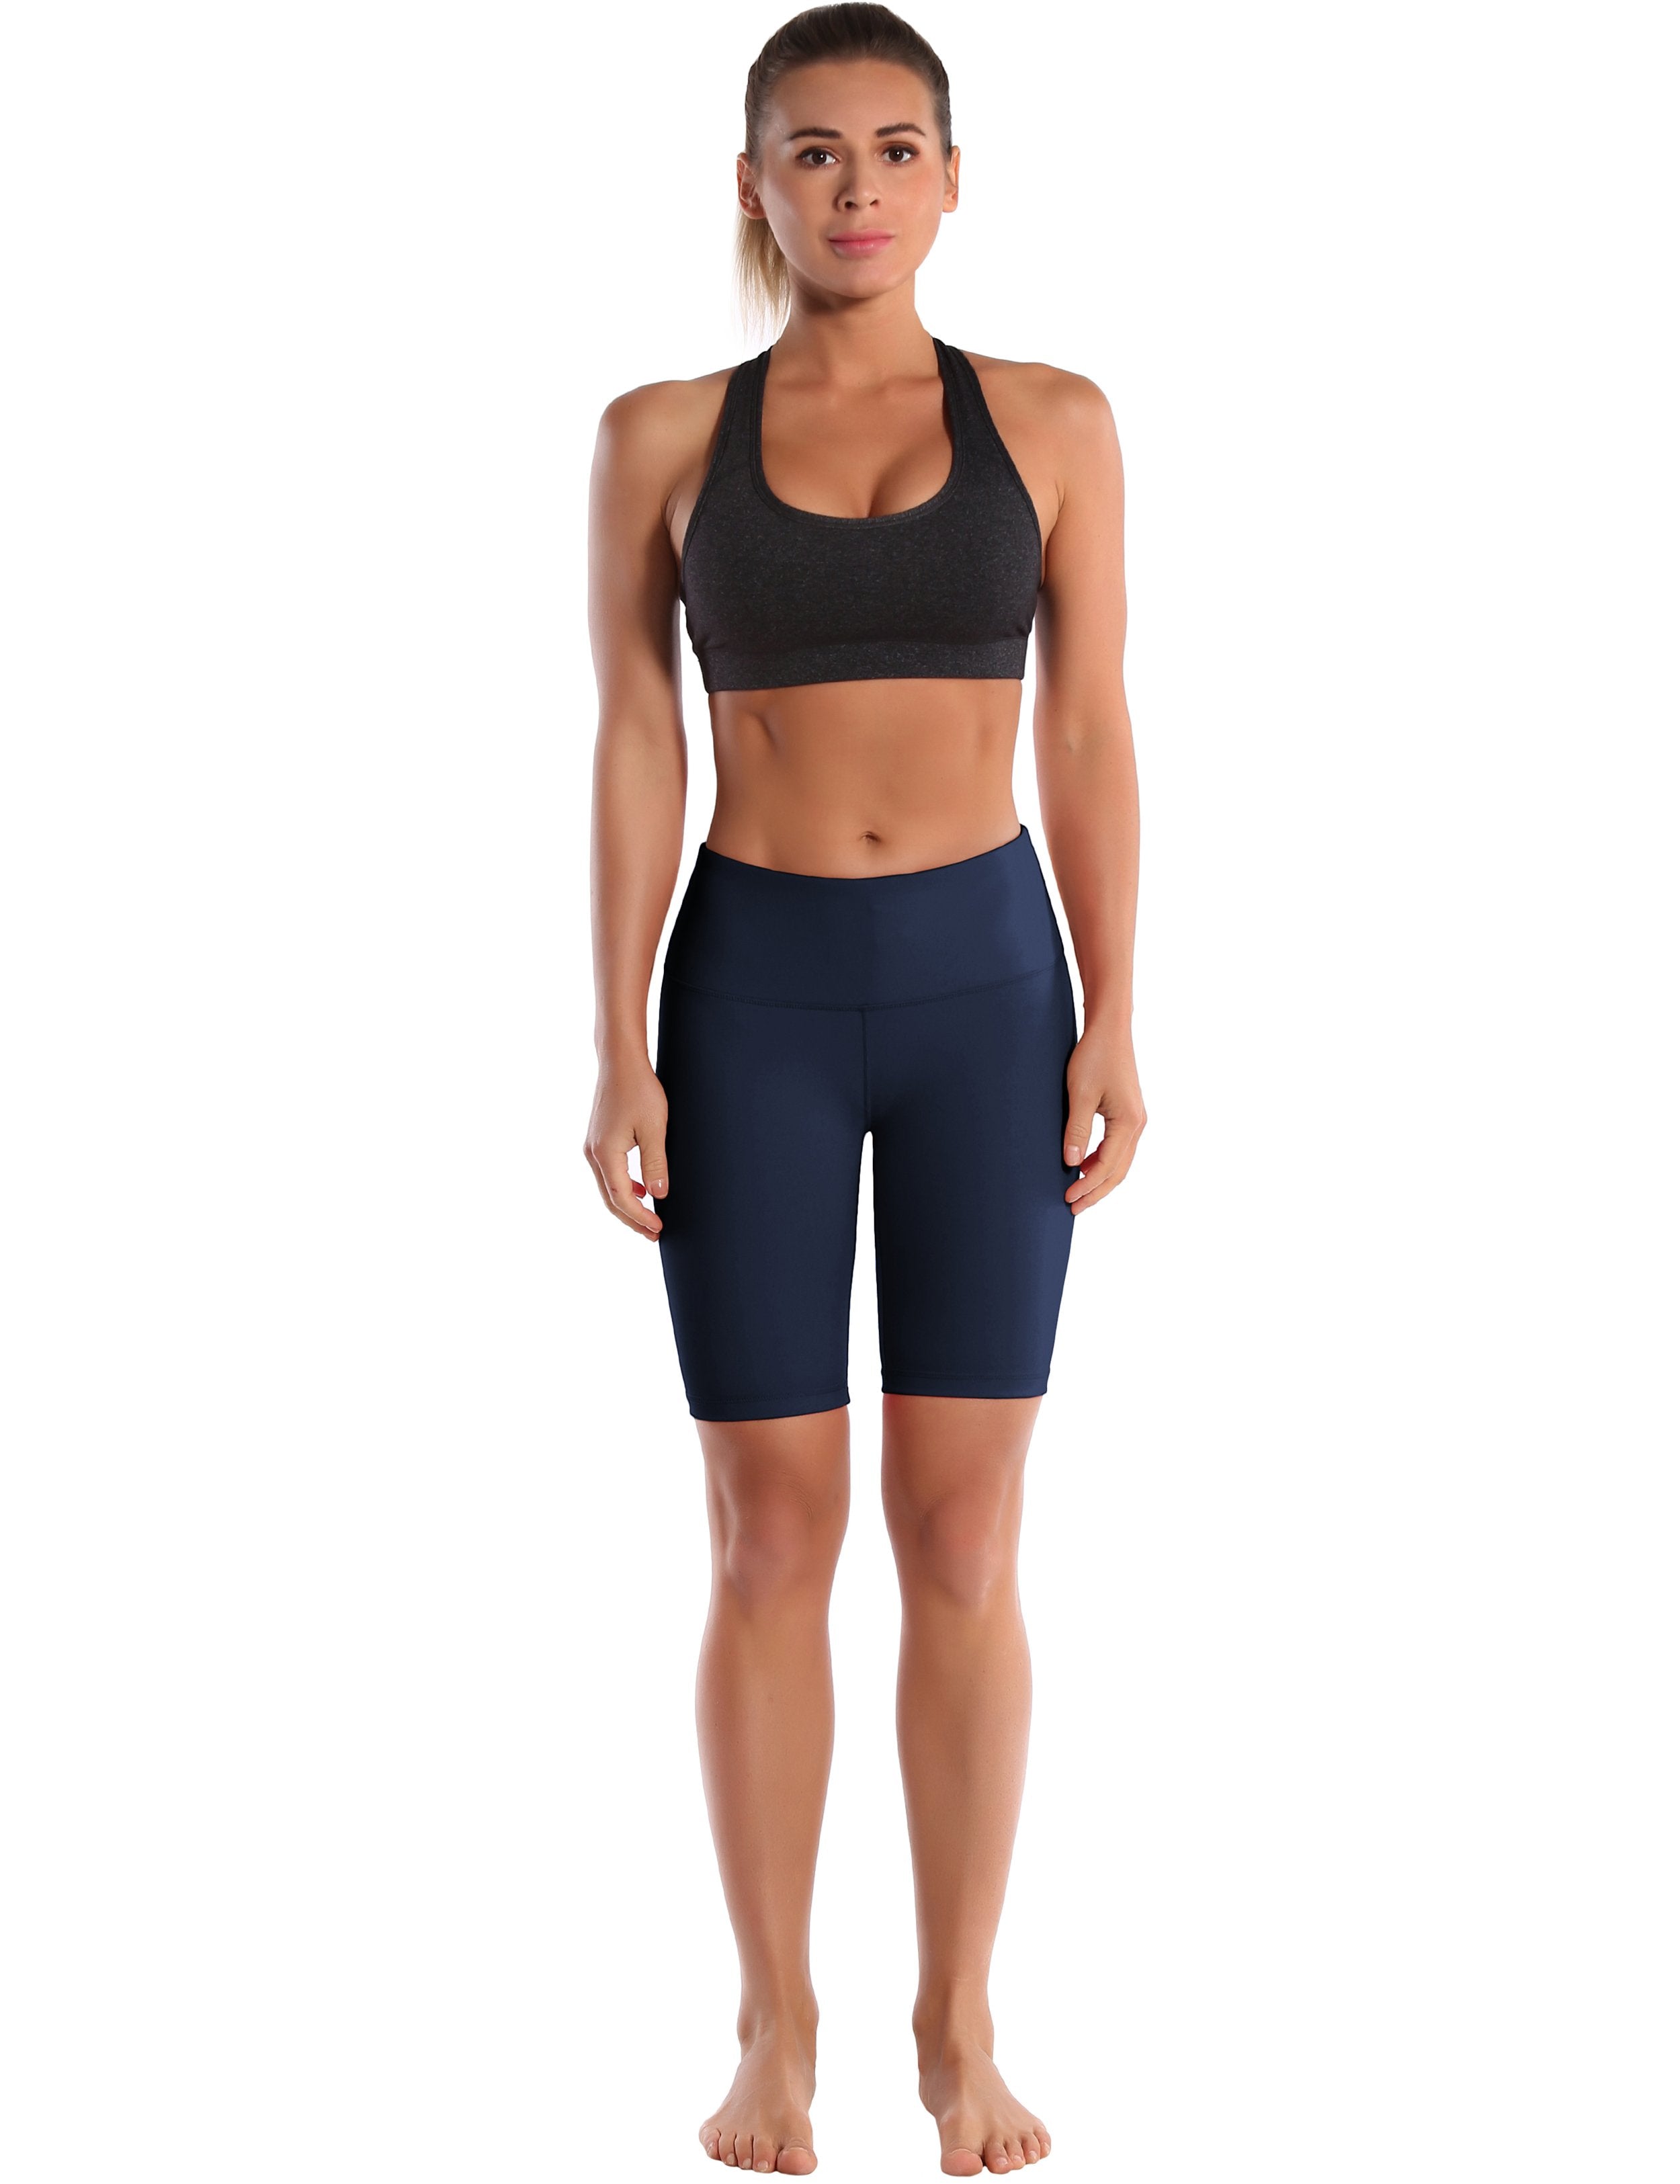 8" High Waist Plus Size Shorts darknavy Sleek, soft, smooth and totally comfortable: our newest style is here. Softest-ever fabric High elasticity High density 4-way stretch Fabric doesn't attract lint easily No see-through Moisture-wicking Machine wash 75% Nylon, 25% Spandex